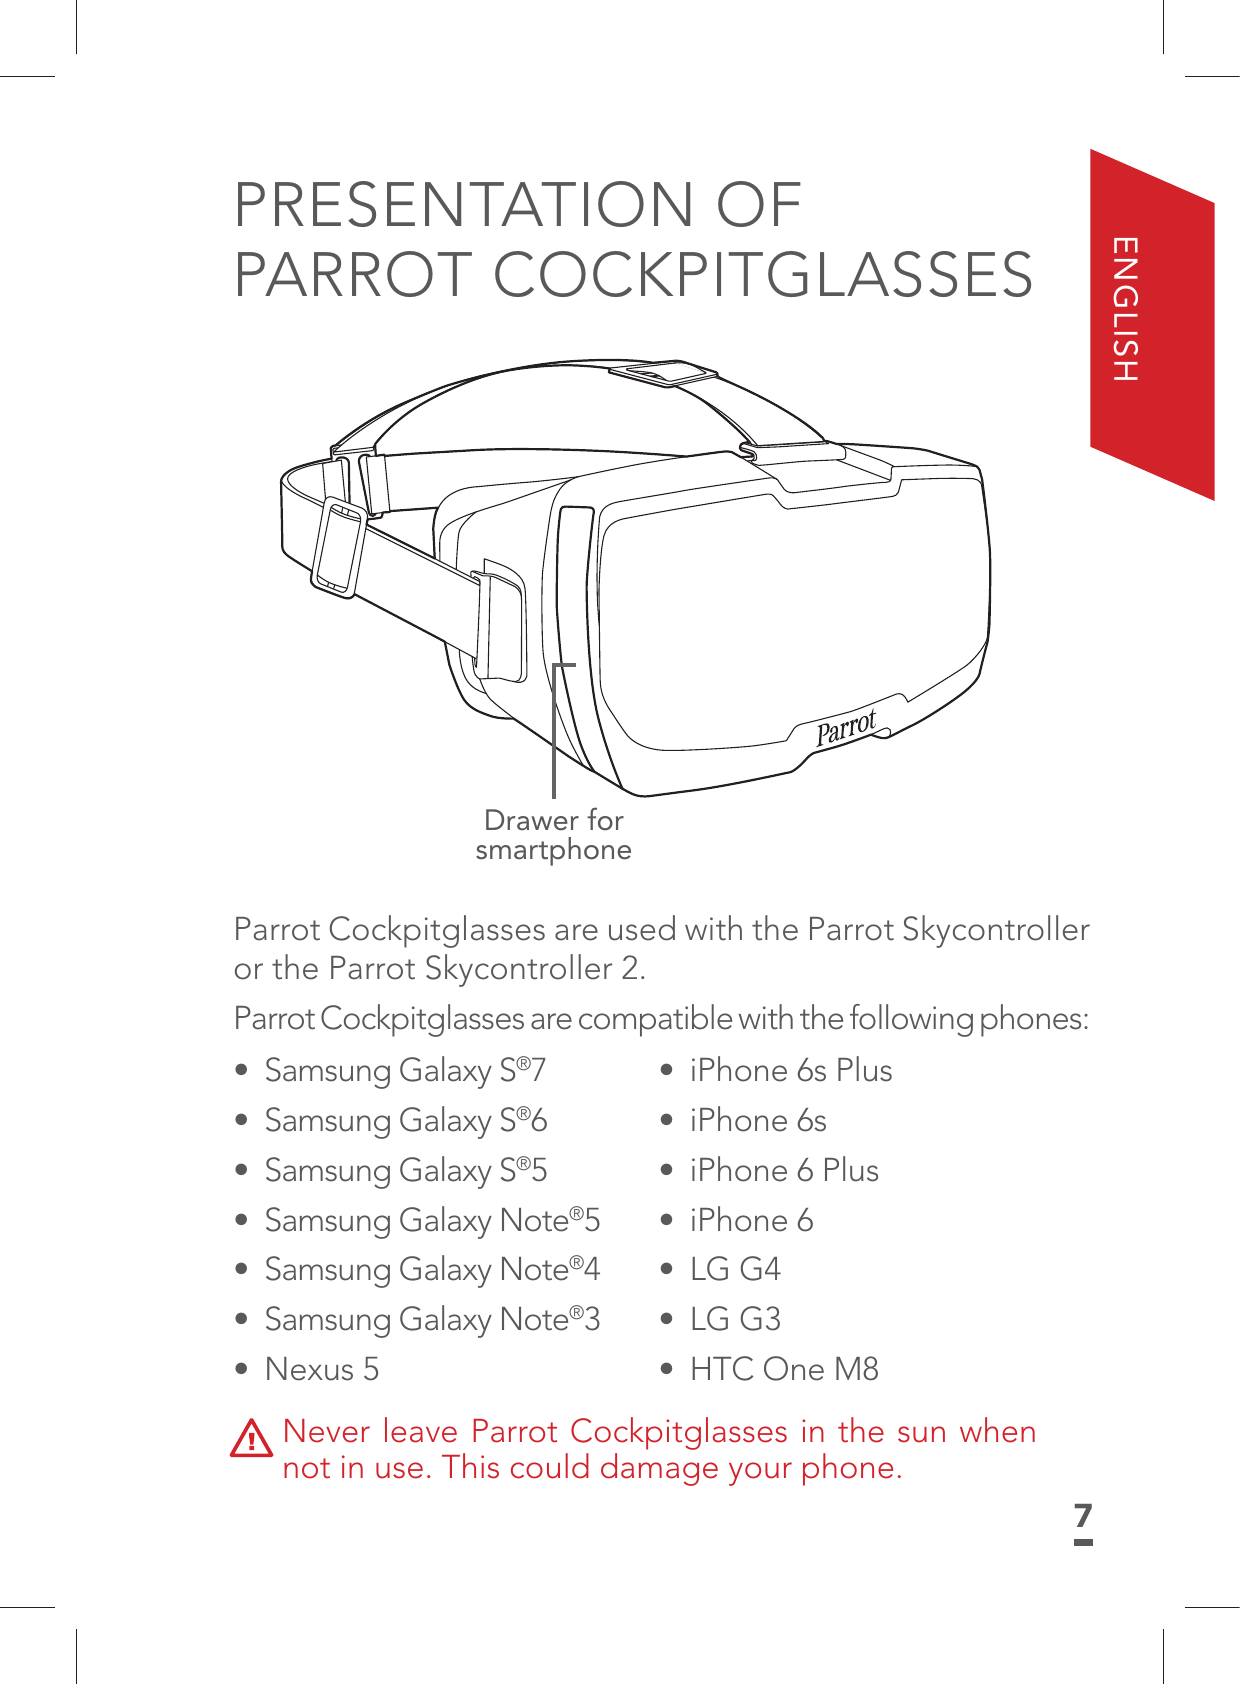 7ENGLISHPRESENTATION OF  PARROT COCKPITGLASSESDrawer for smartphoneParrot Cockpitglasses are used with the Parrot Skycontroller or the Parrot Skycontroller 2.Parrot Cockpitglasses are compatible with the following phones: •  iPhone 6s Plus • iPhone 6s•  iPhone 6 Plus• iPhone 6 • LG G4• LG G3•  HTC One M8•  Samsung Galaxy S®7•  Samsung Galaxy S®6•  Samsung Galaxy S®5•  Samsung Galaxy Note®5•  Samsung Galaxy Note®4•  Samsung Galaxy Note®3• Nexus 5Never leave Parrot Cockpitglasses in the sun when not in use. This could damage your phone.